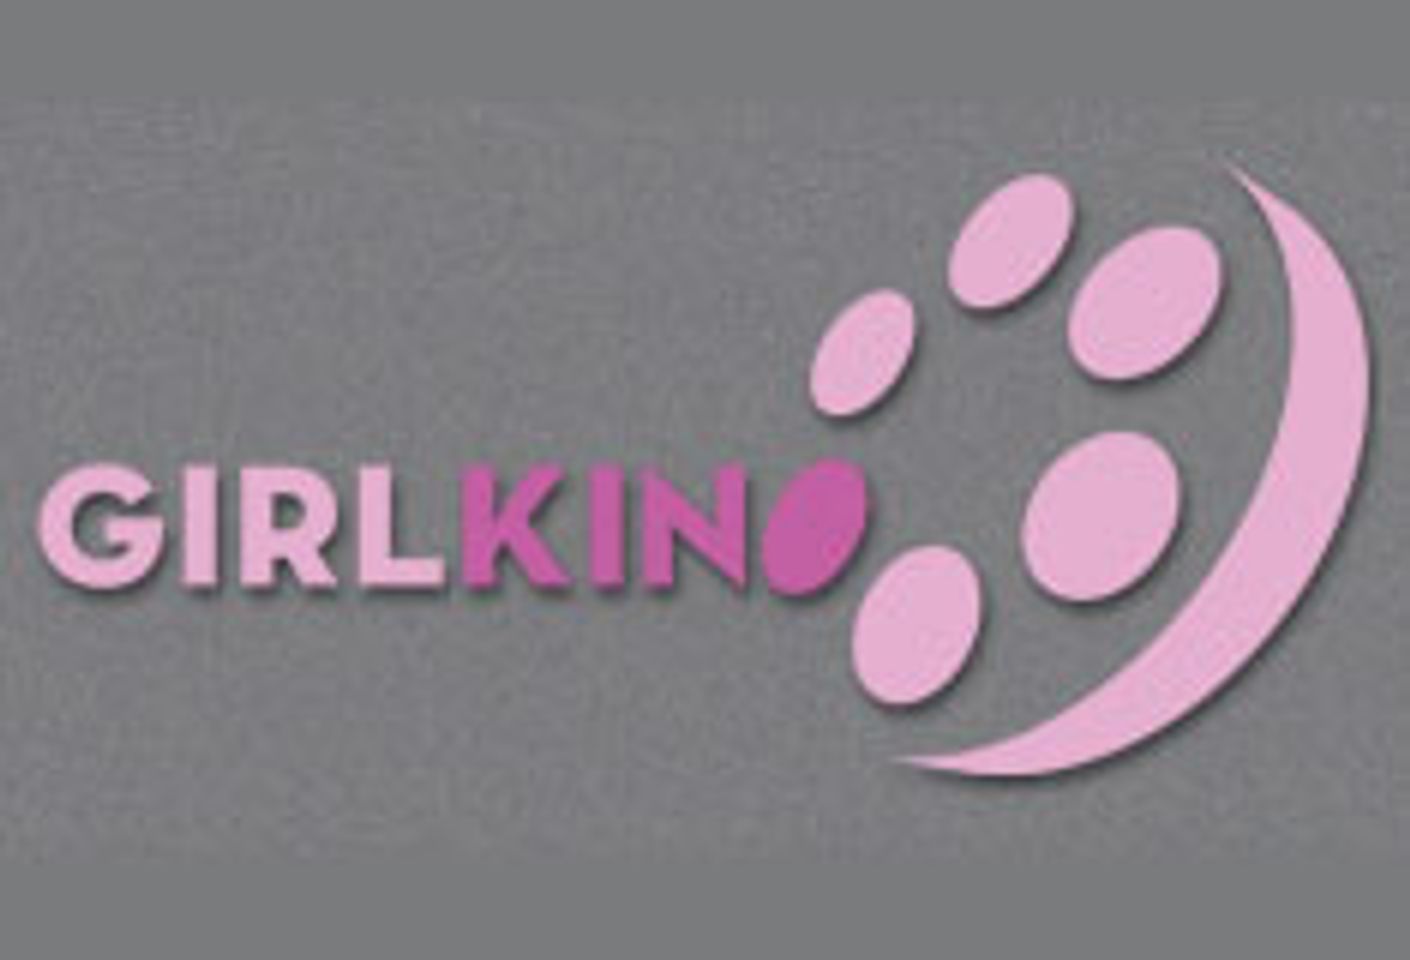 Top Sites Collaborate and Launch GirlKino.com